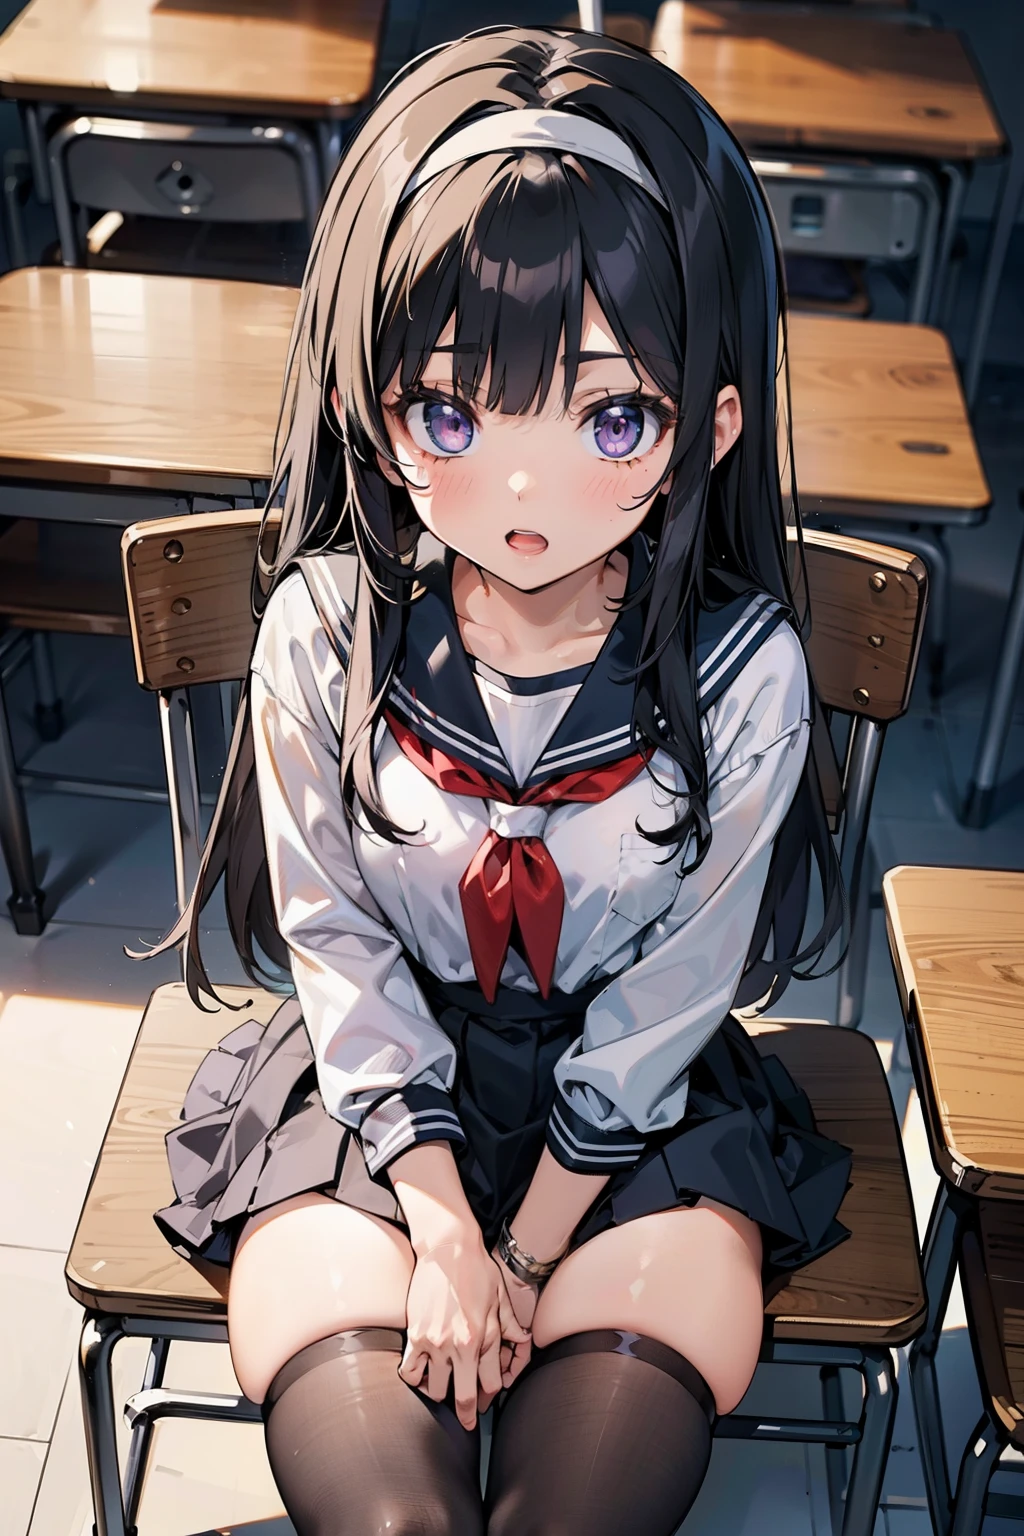 body 8 times longer than head, (Highly detailed CG unity 8k), (highest quality)，(very detailed)，(ultra high resolution),  (Students studying in chairs), Are sleeping, black hair, High school girl wearing a navy sailor suit, Anime 2D rendering, realistic young anime high school girl, ((White headband)), purple eyes, small breasts, tall, slanted eyes, (school scenery), black stockings, bright color, open your mouth, Dark blue skirt,  Straight Long Hair, Bangs Patsun, position looking down from above, anime style, 1, classroom,